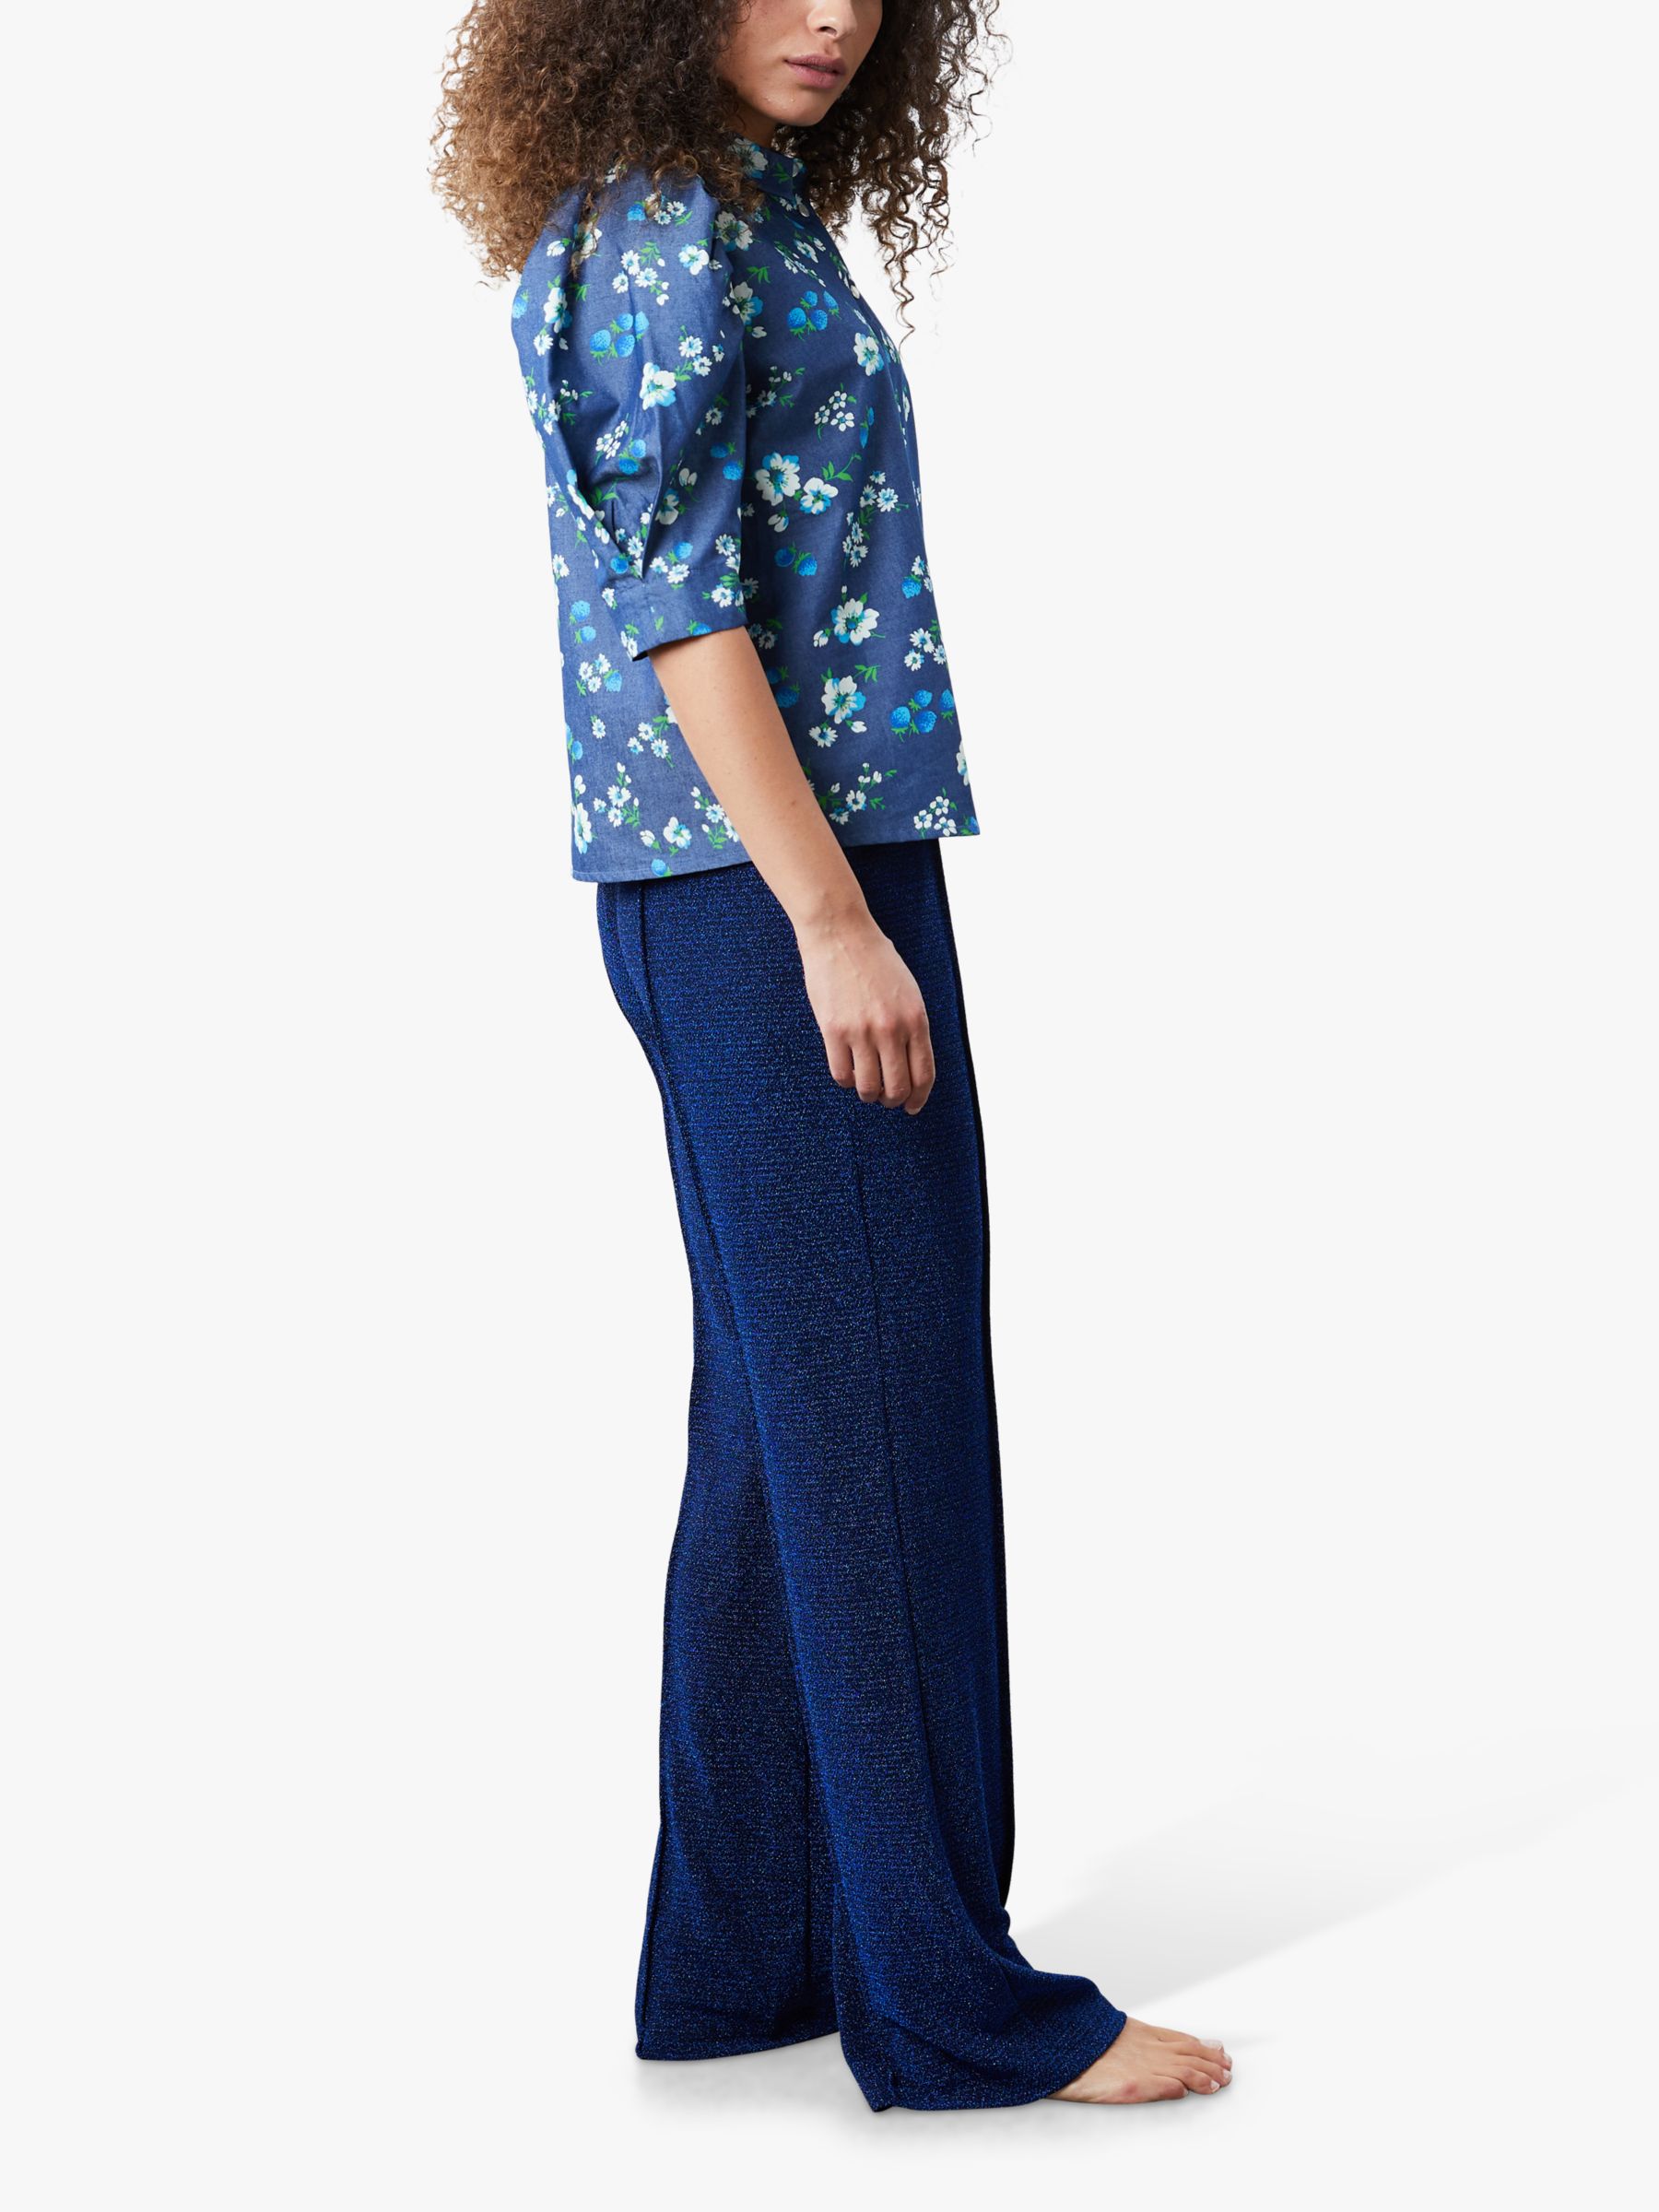 Buy Lollys Laundry Bono Floral Bloom Print Puff Sleeve Shirt, Blue/Multi Online at johnlewis.com